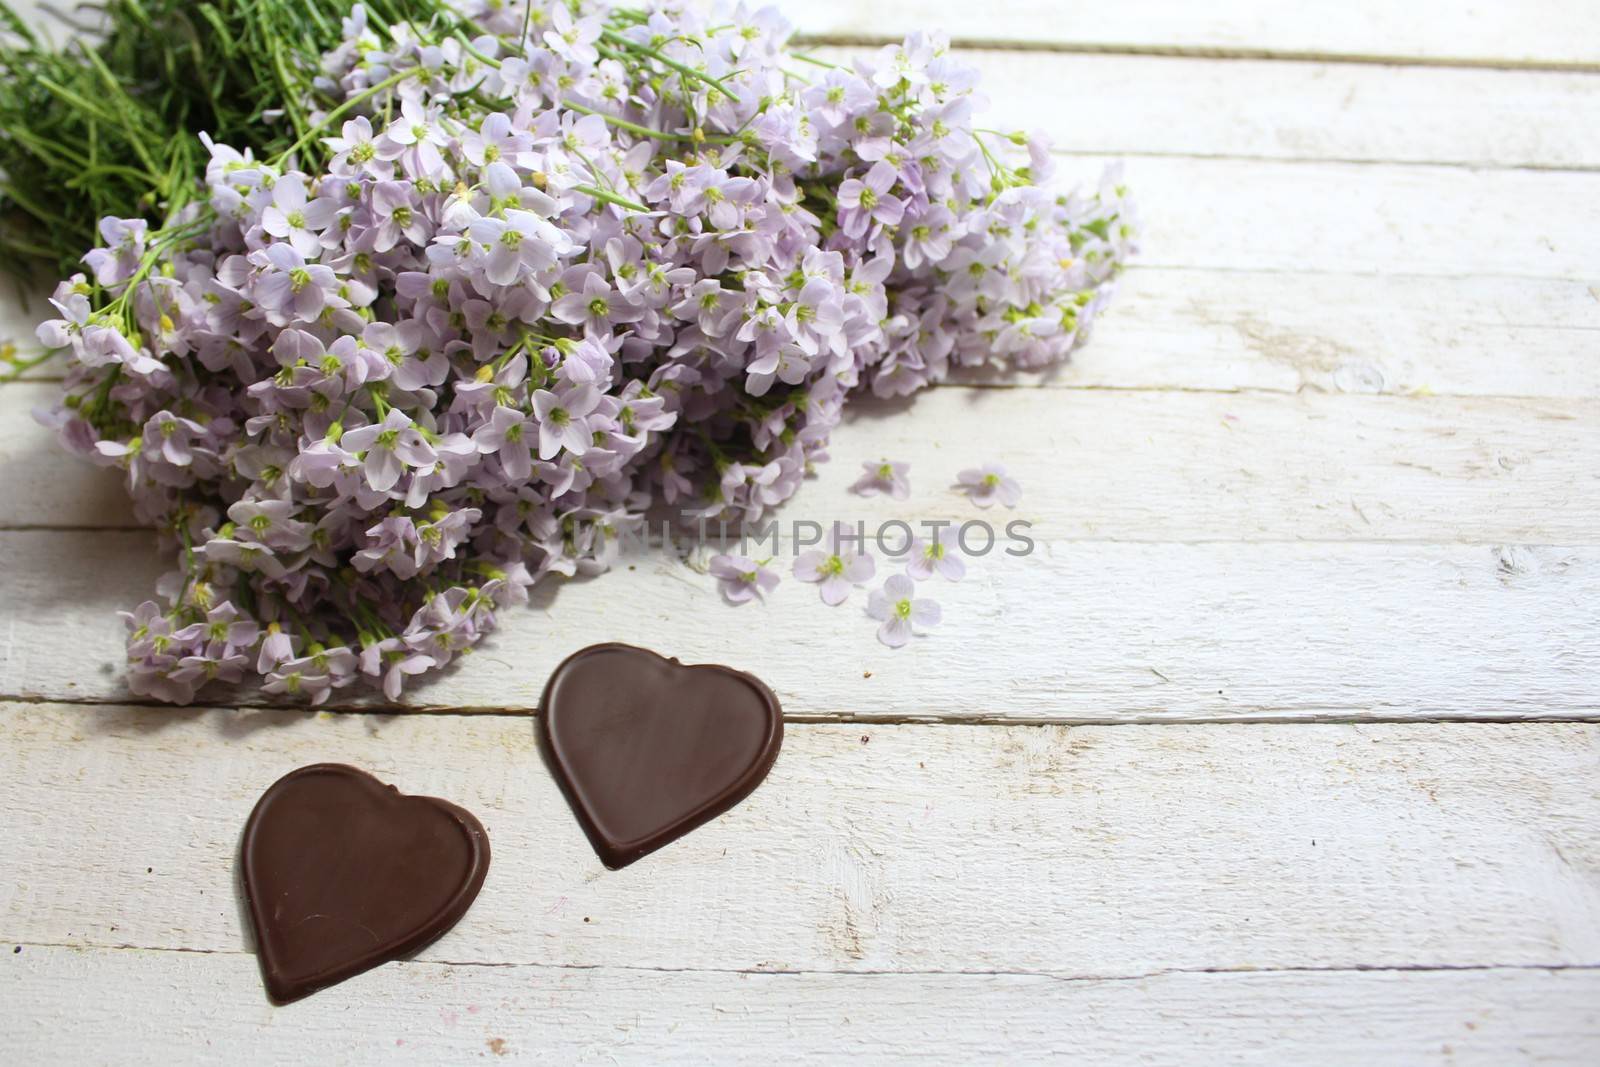 cuckoo flowers with chocolate hearts by martina_unbehauen